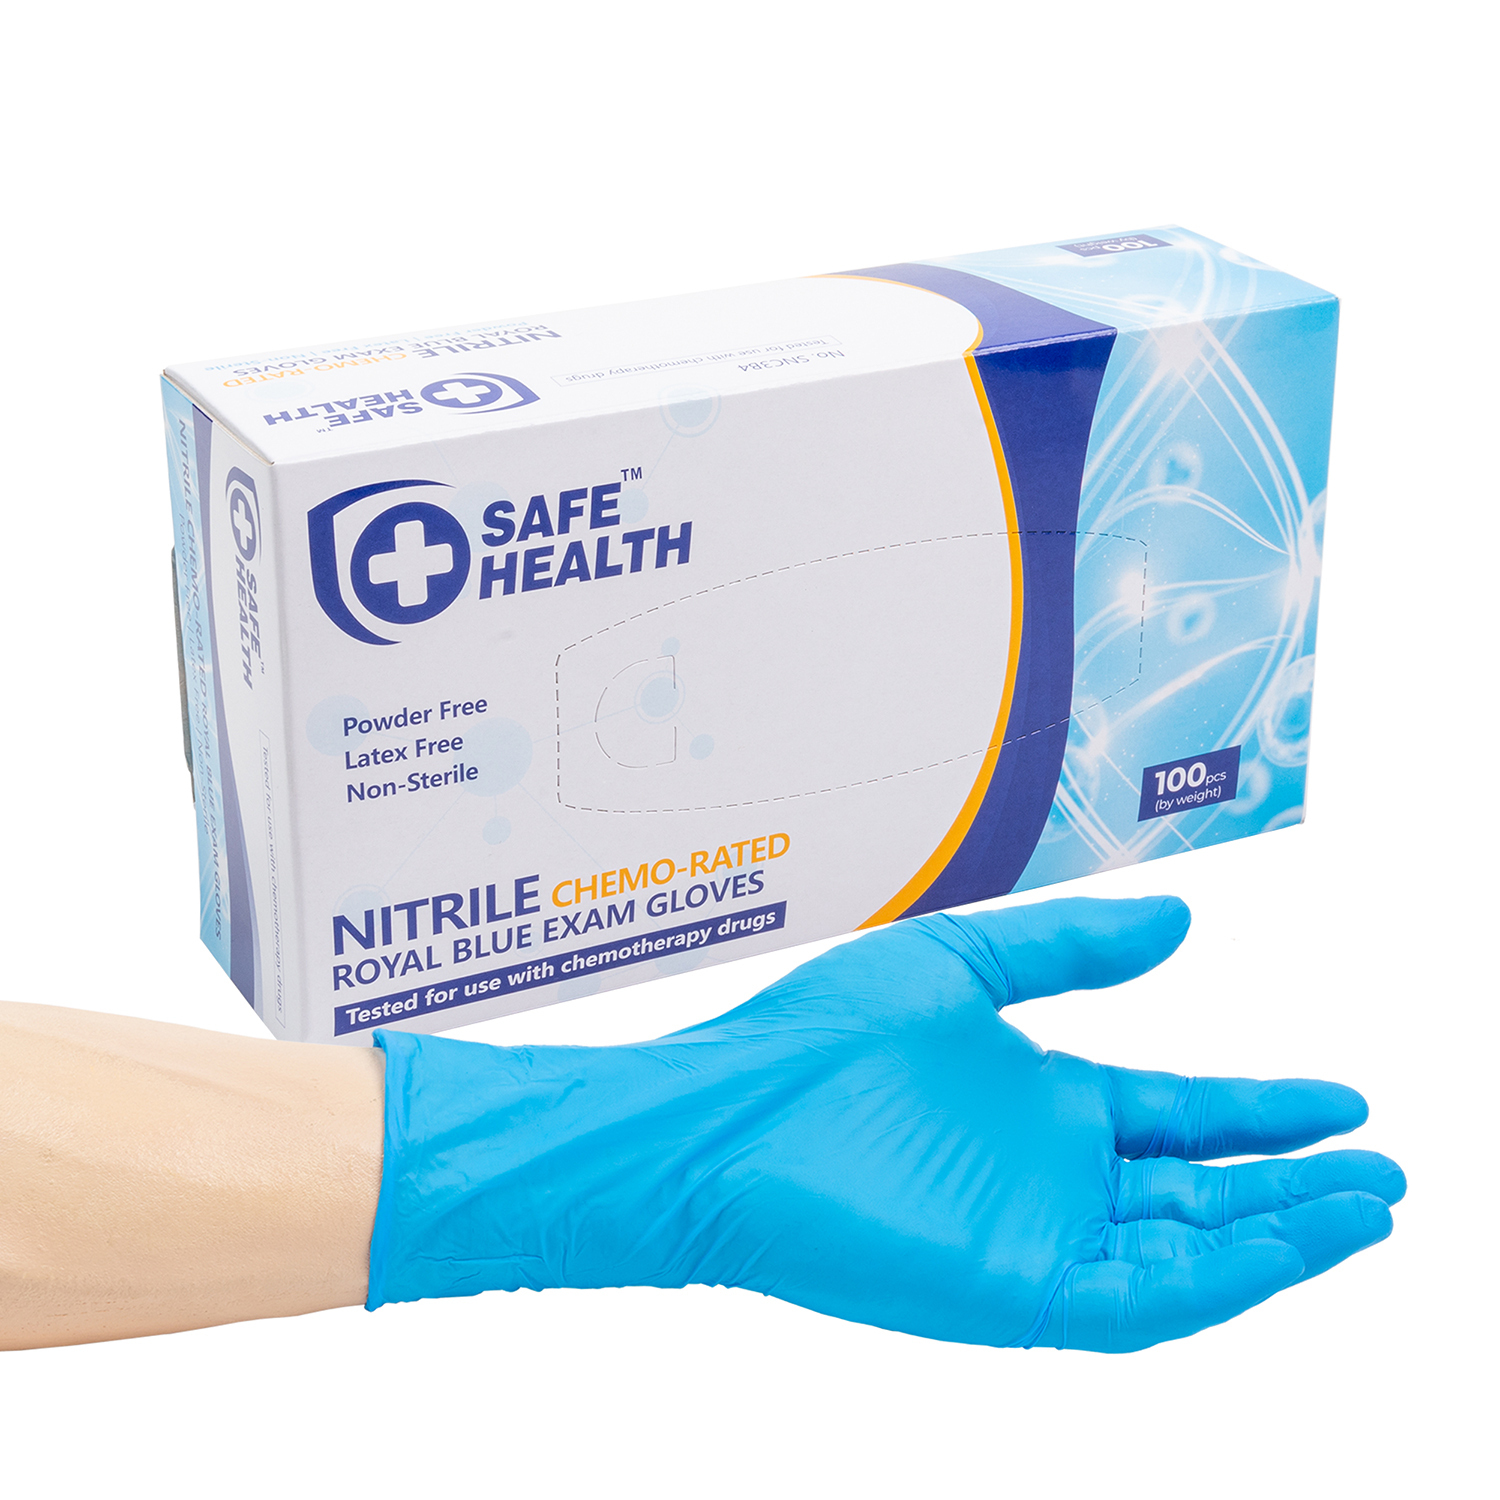 AmerCareRoyal Safe Health Chemo Rated Powder Free Nitrile Exam Gloves, 3 mil, Case of 1000